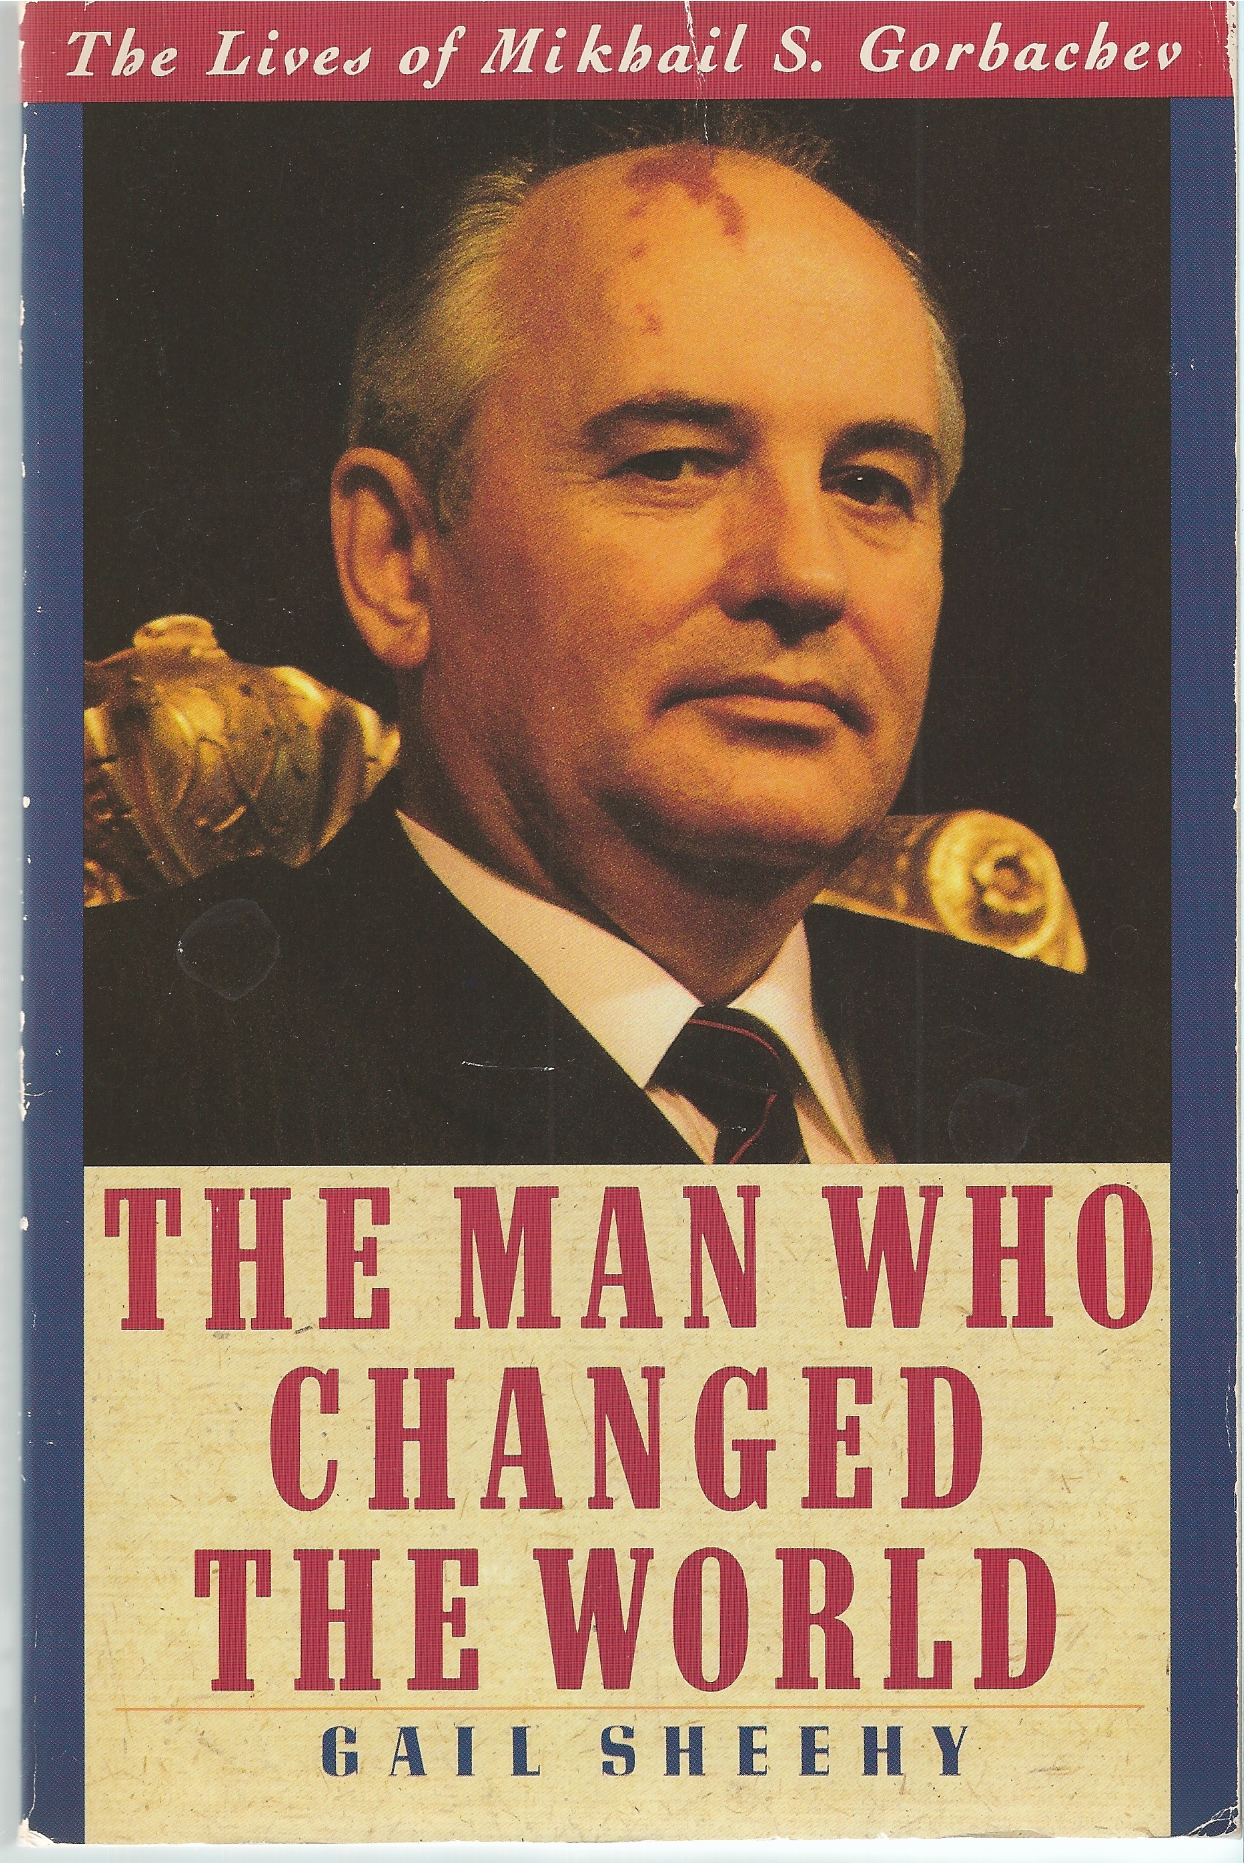 SHEEHY GAIL - Man Who Changed the World. The the Lives of Mikhail S. Gorbachev